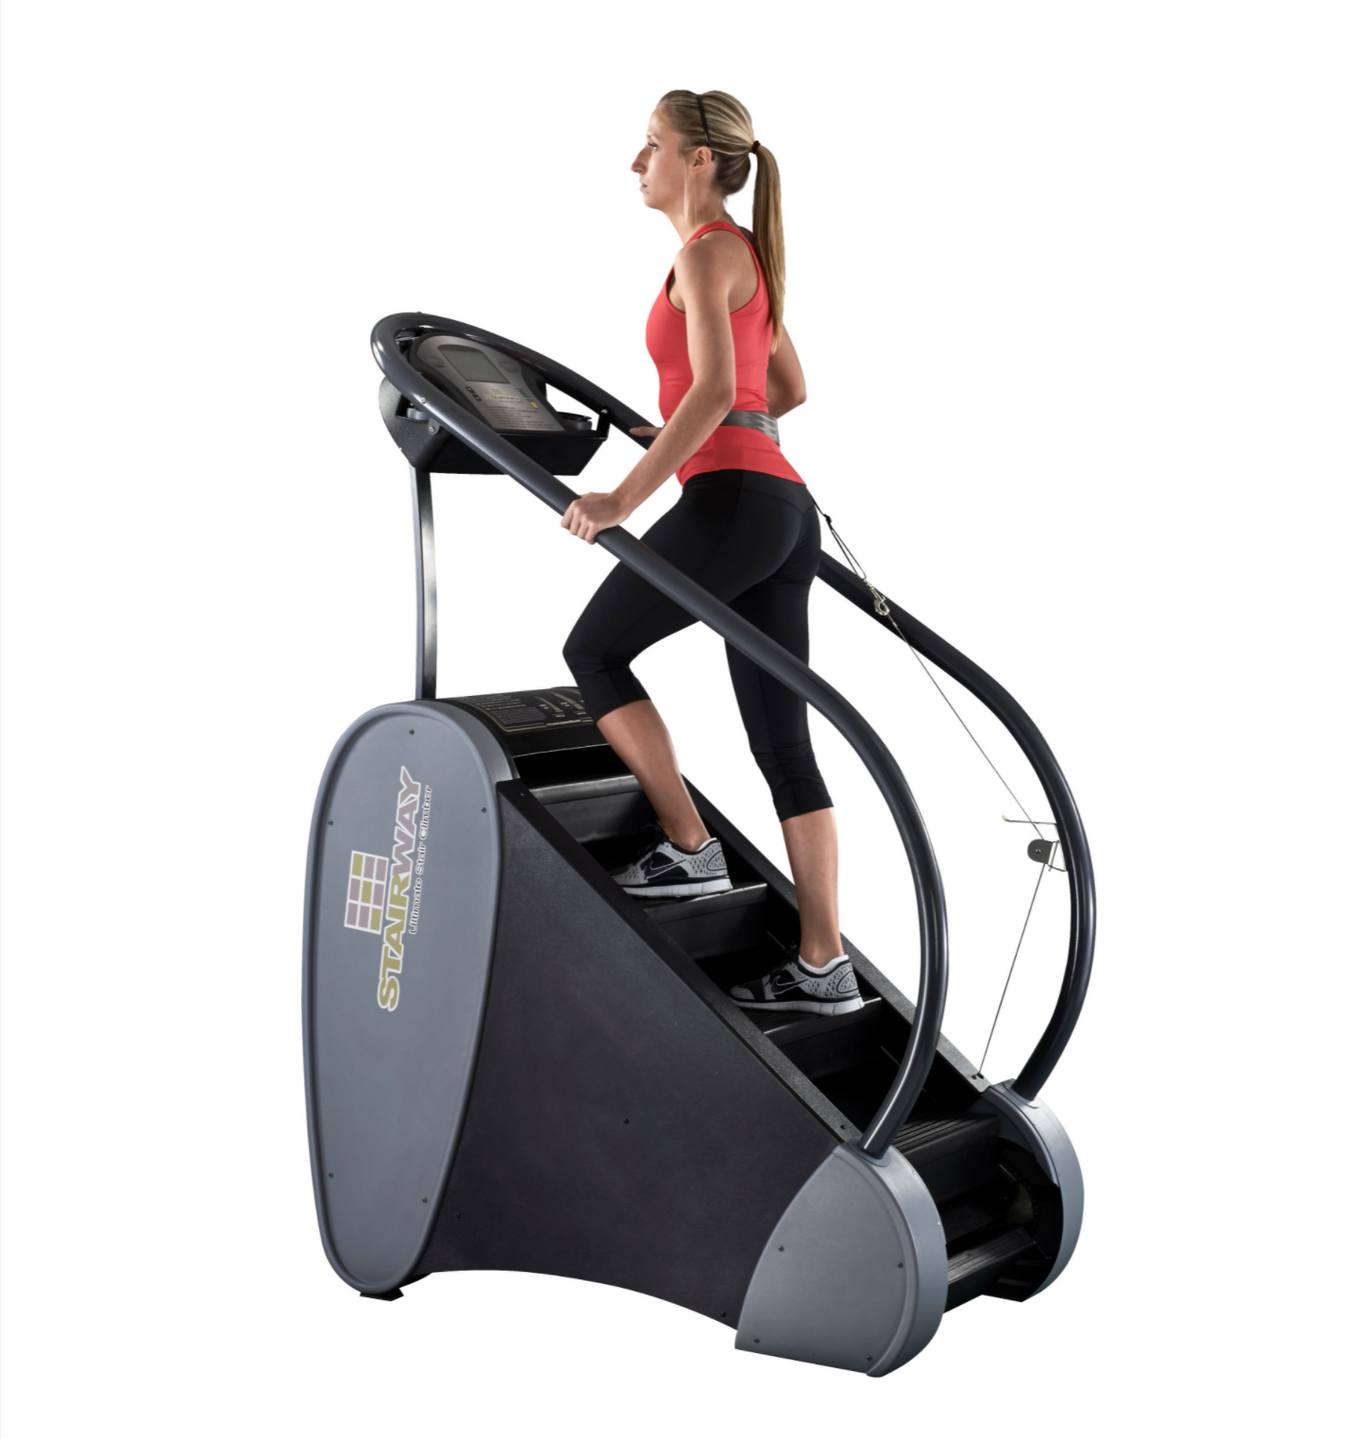 The best stair steppers and climbing machines offer calorie burring and intense training. Buy a quality stair stepper or climber today at the best price on the internet.